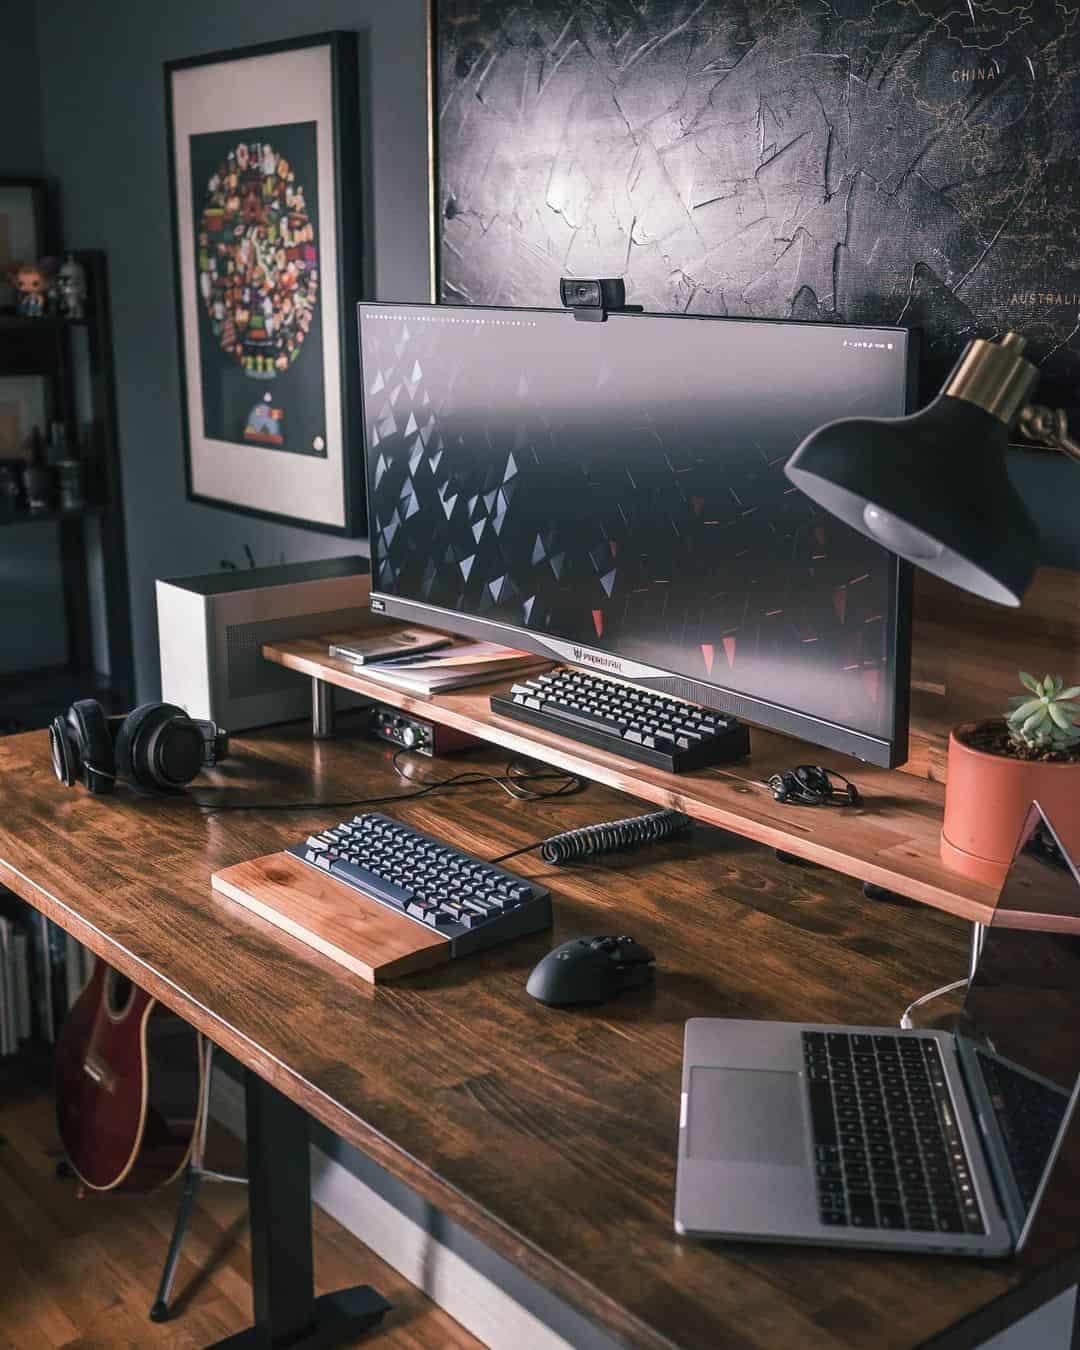 https://roomssolutions.com/wp-content/uploads/2020/11/Double-level-desk-with-monitor-and-laptop.jpg